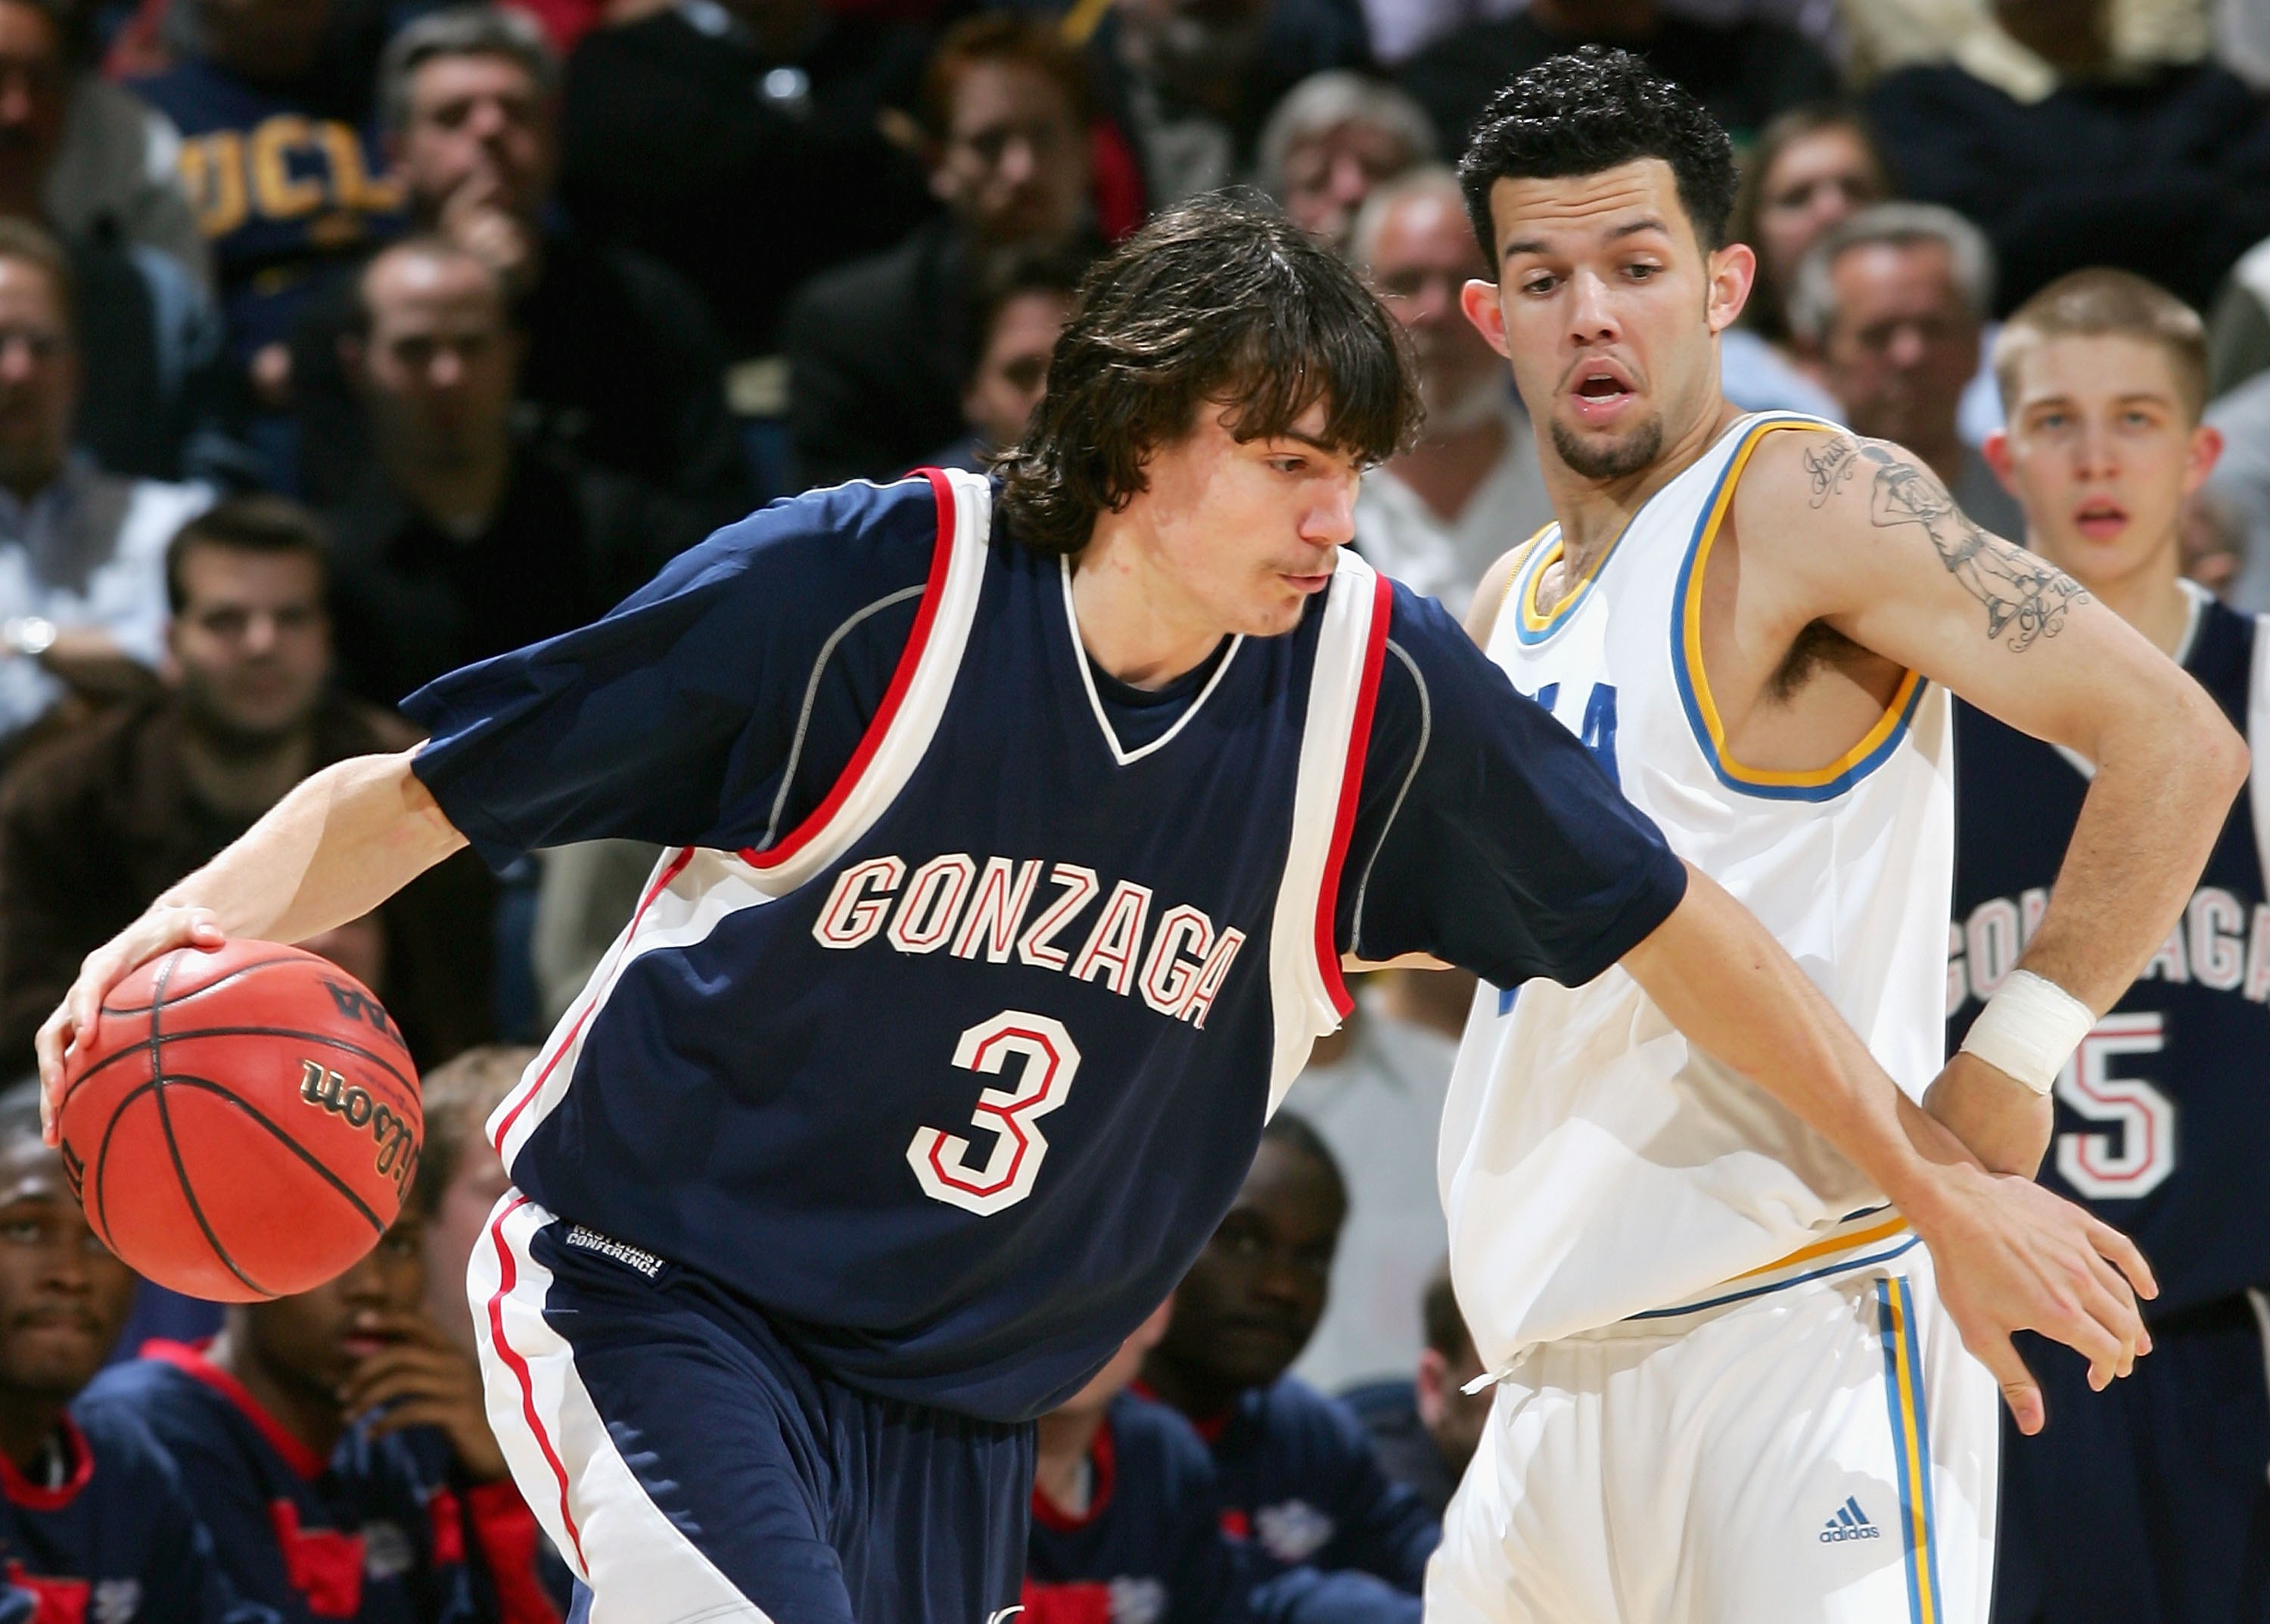 Adam Morrison goes nuts after Gonzaga's Final Four miracle